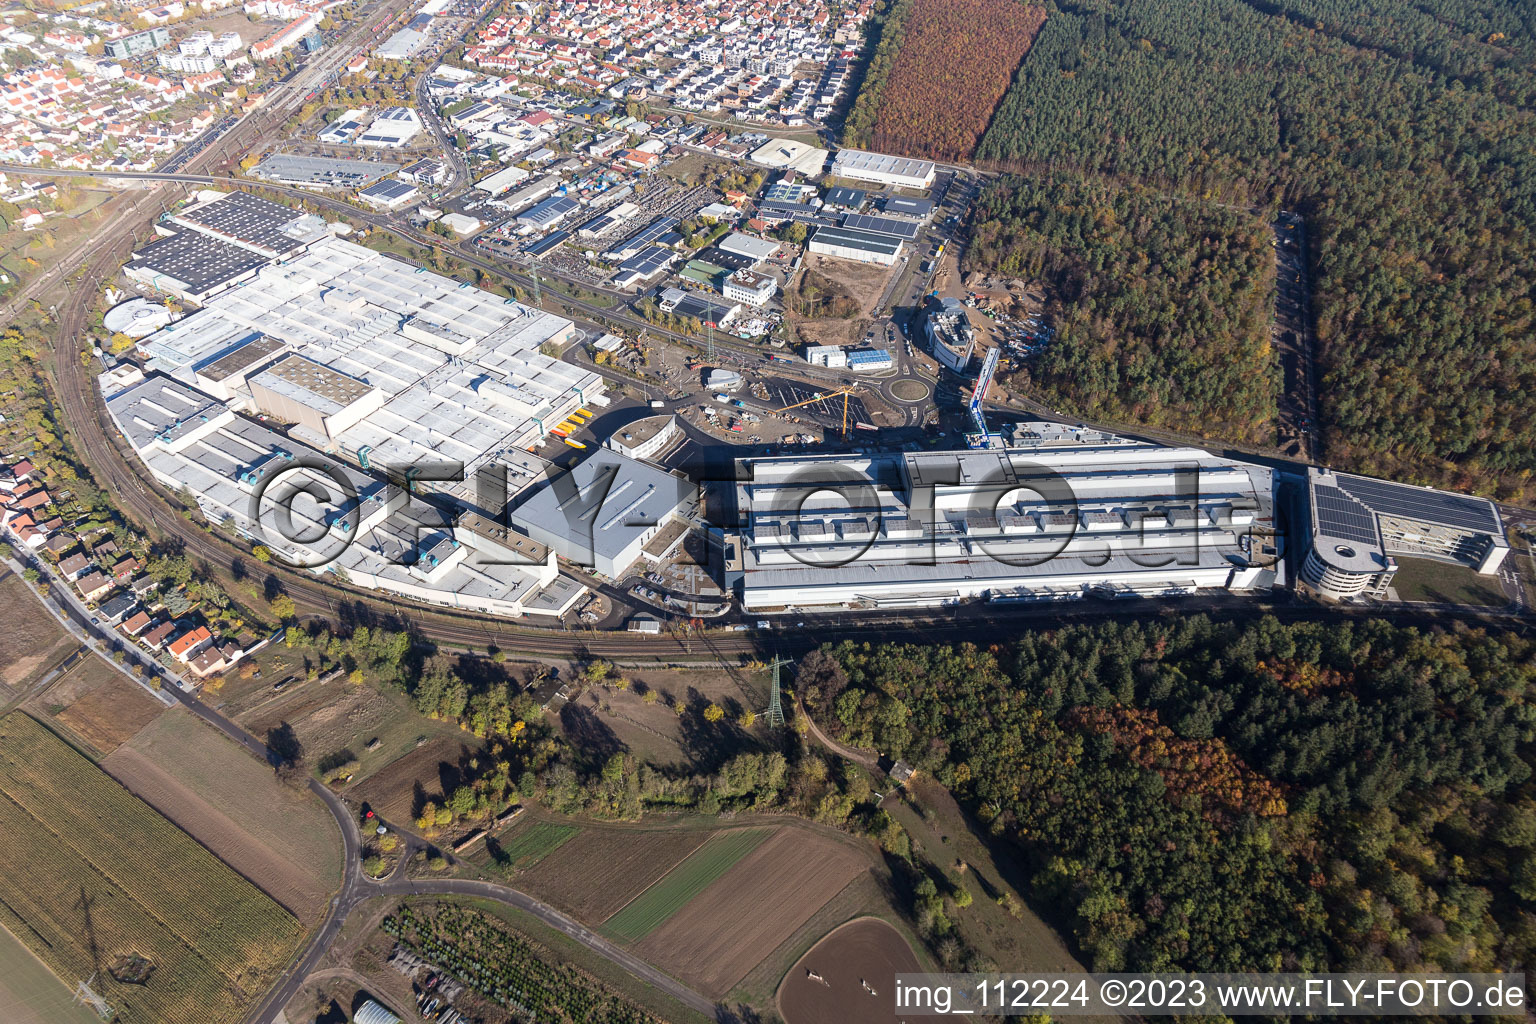 SEW-EURODRIVE GmbH & Co KG in the district Graben in Graben-Neudorf in the state Baden-Wuerttemberg, Germany from the drone perspective